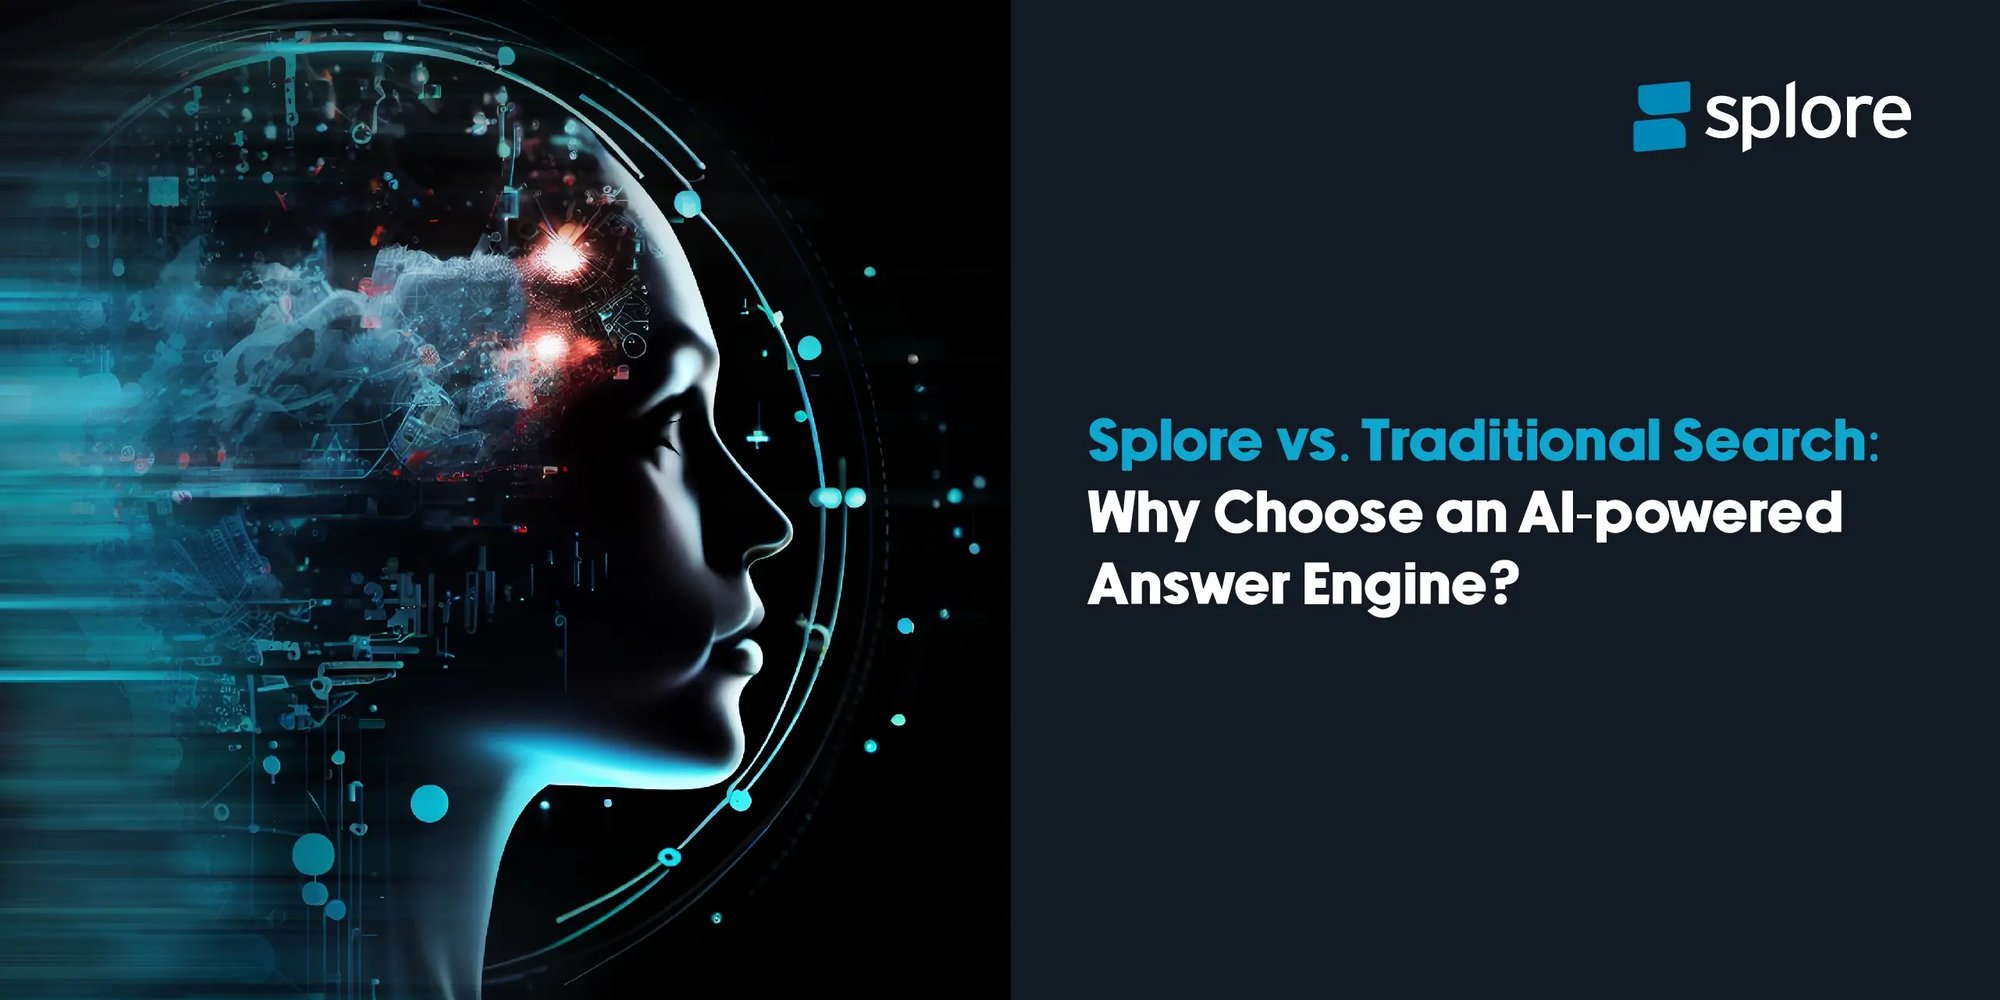 Splore vs. Traditional Search: Why Choose an AI-powered Answer Engine